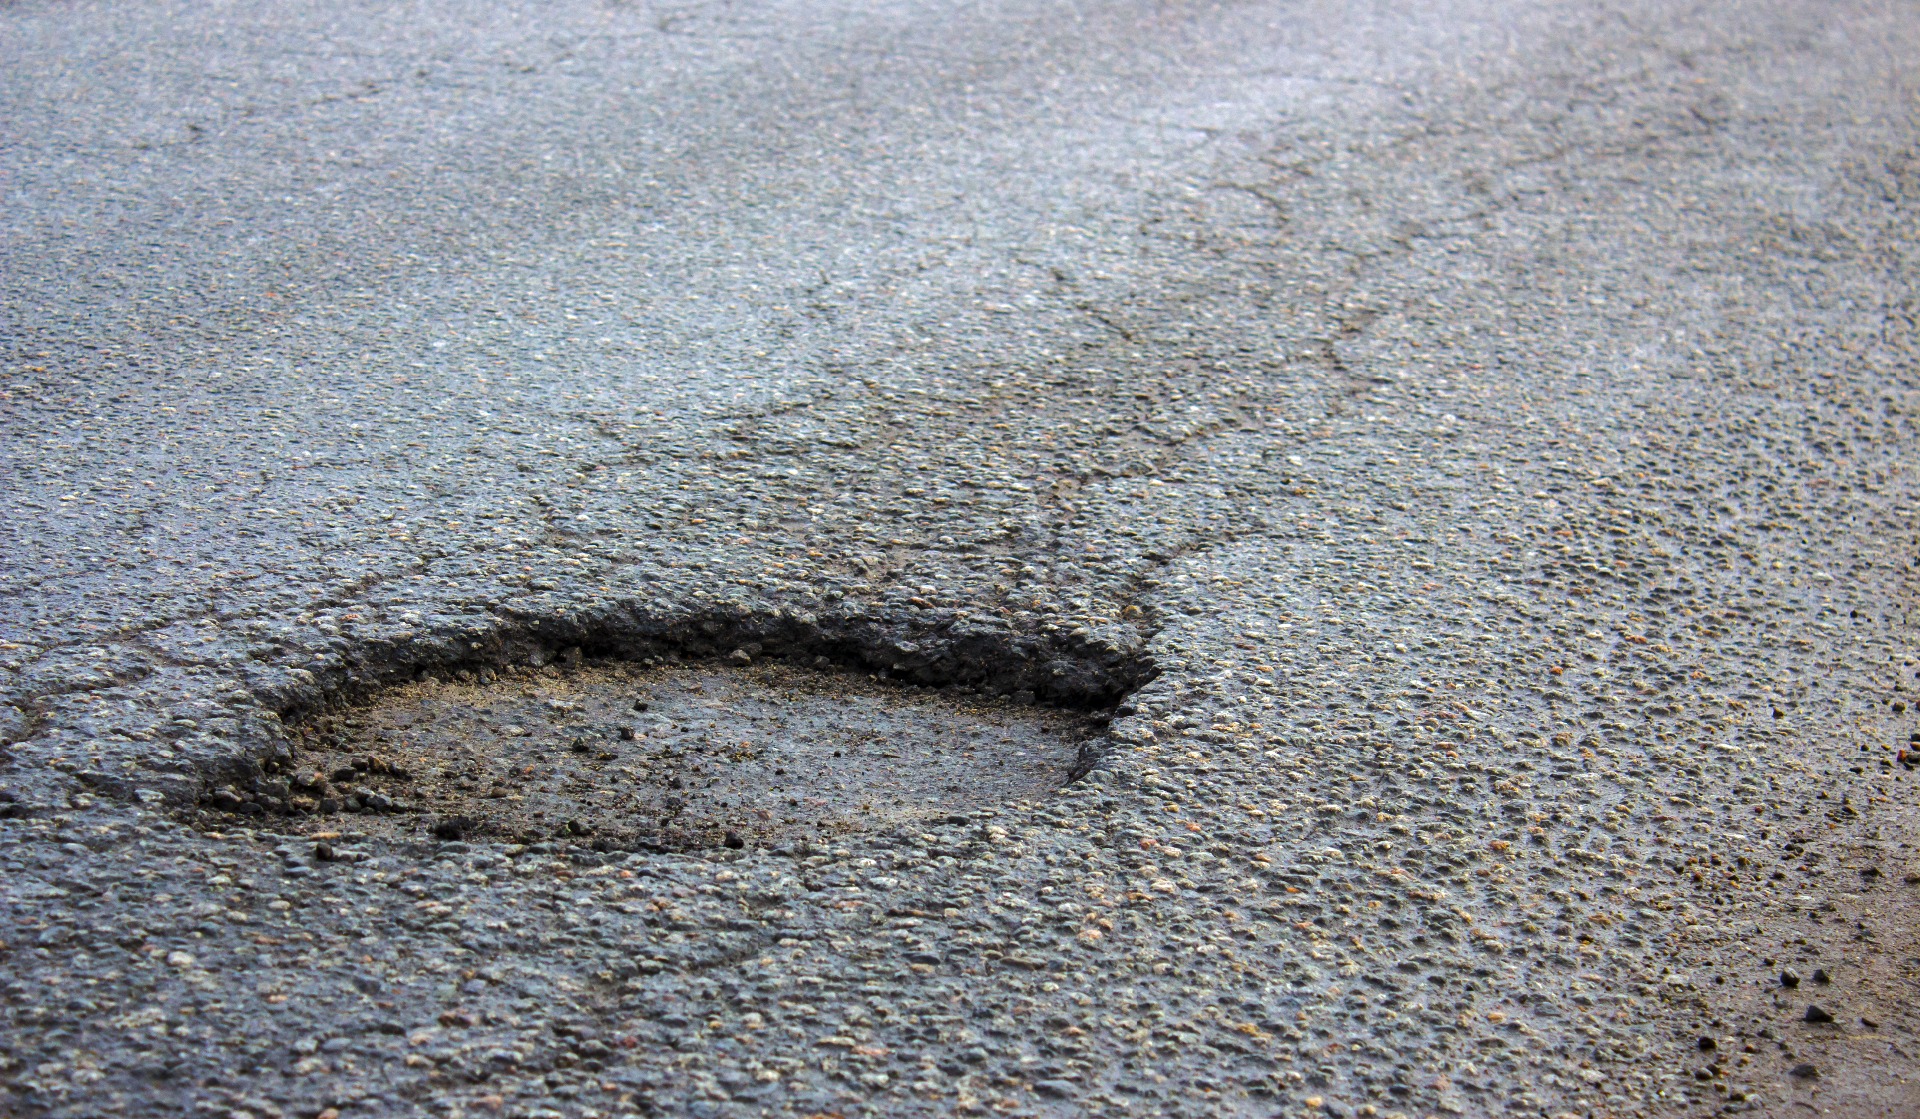 Huge pothole in a Tarmac road surface